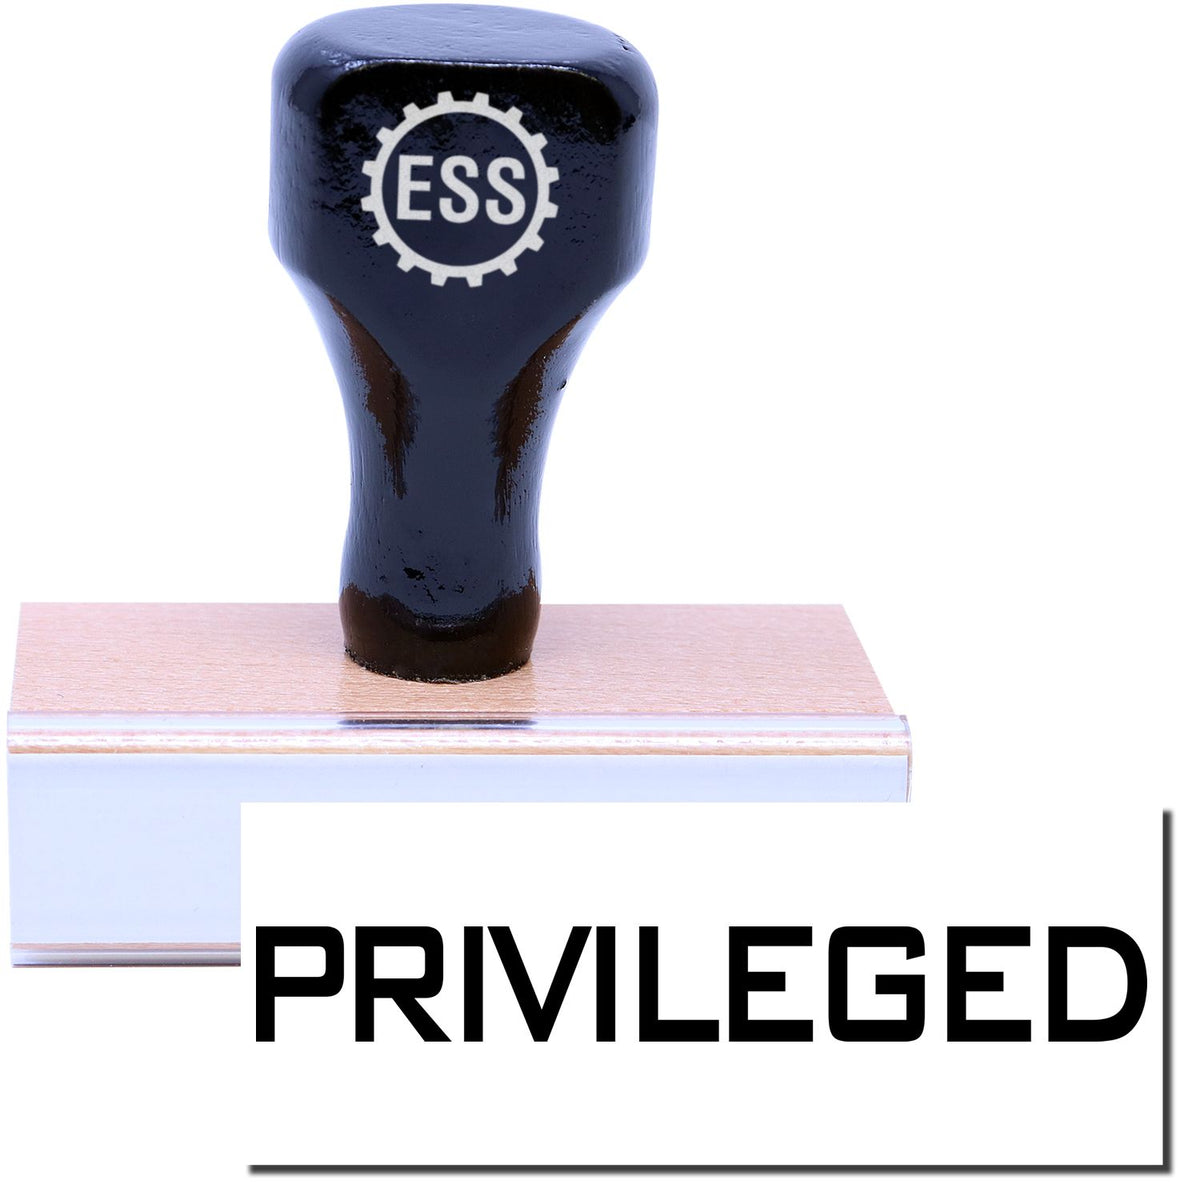 A stock office rubber stamp with a stamped image showing how the text &quot;PRIVILEGED&quot; in a large font is displayed after stamping.